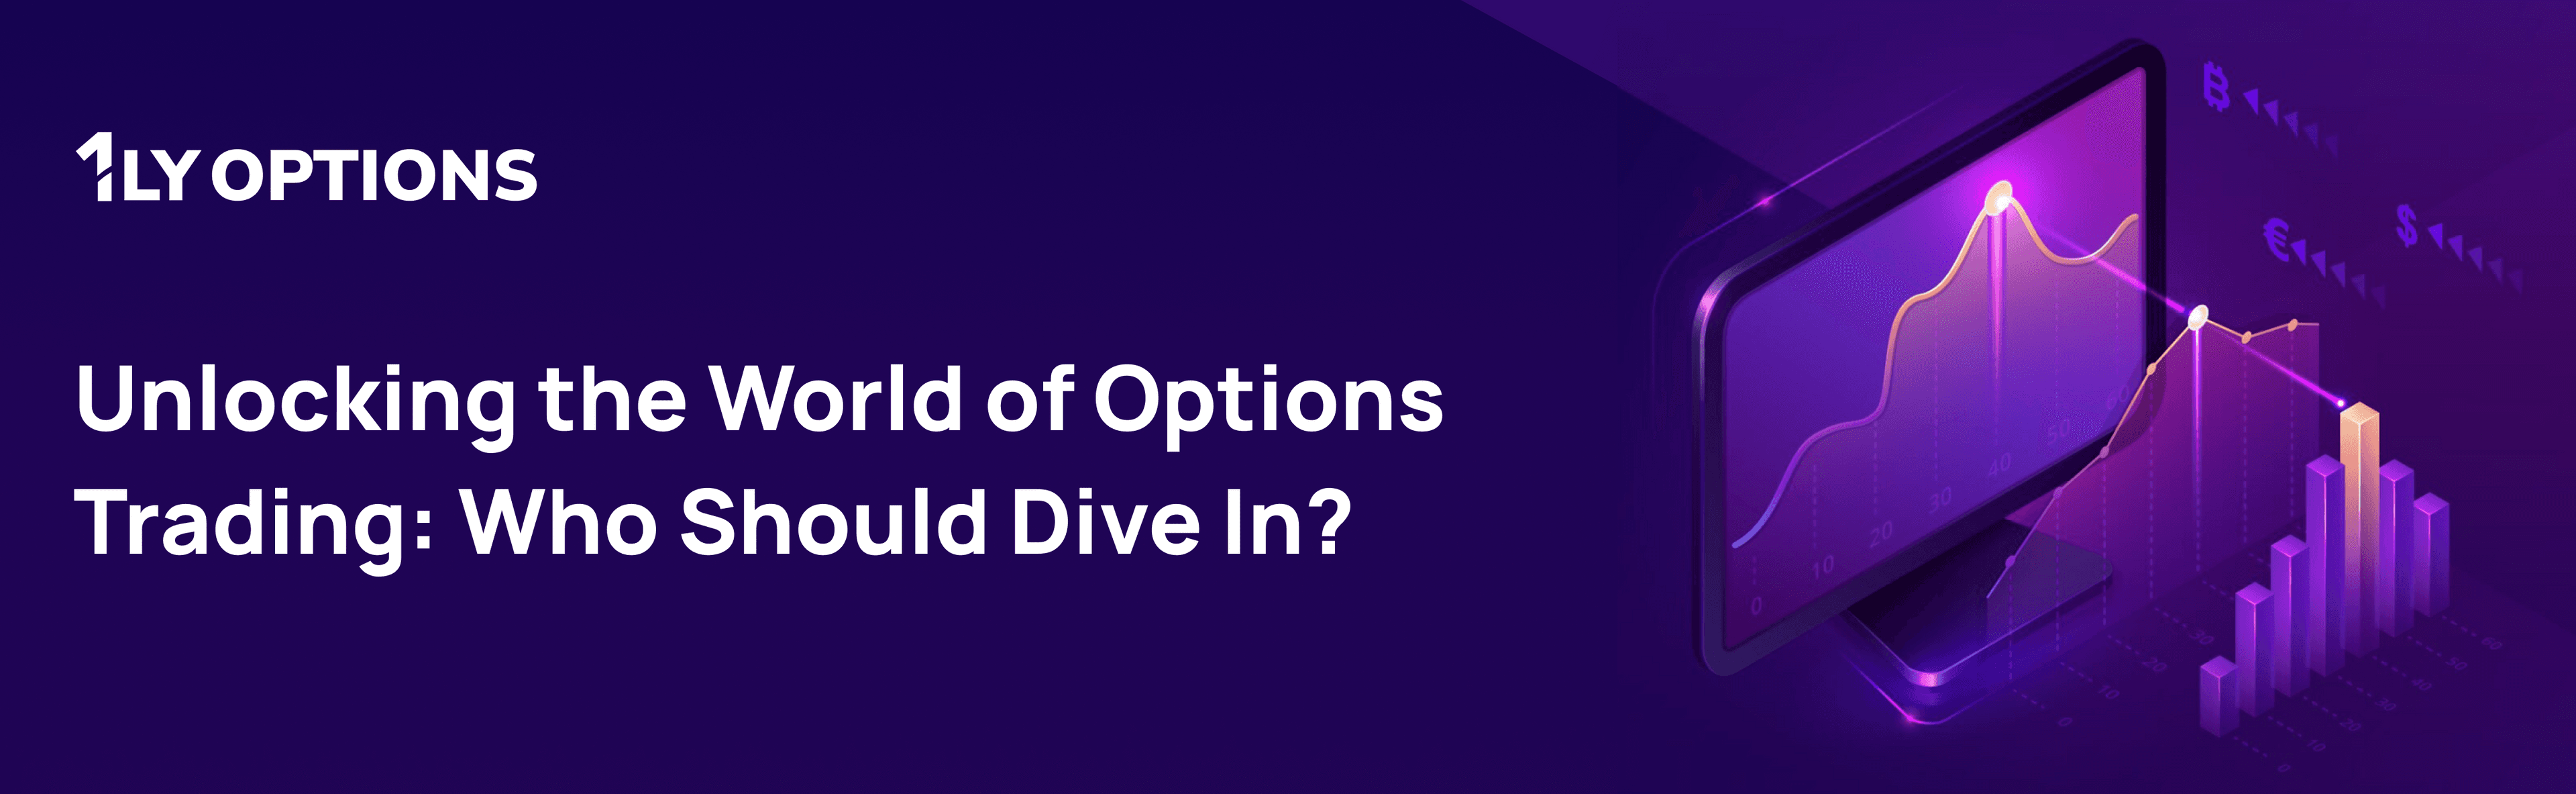 Unlocking the World of Options Trading: Who Should Dive In?